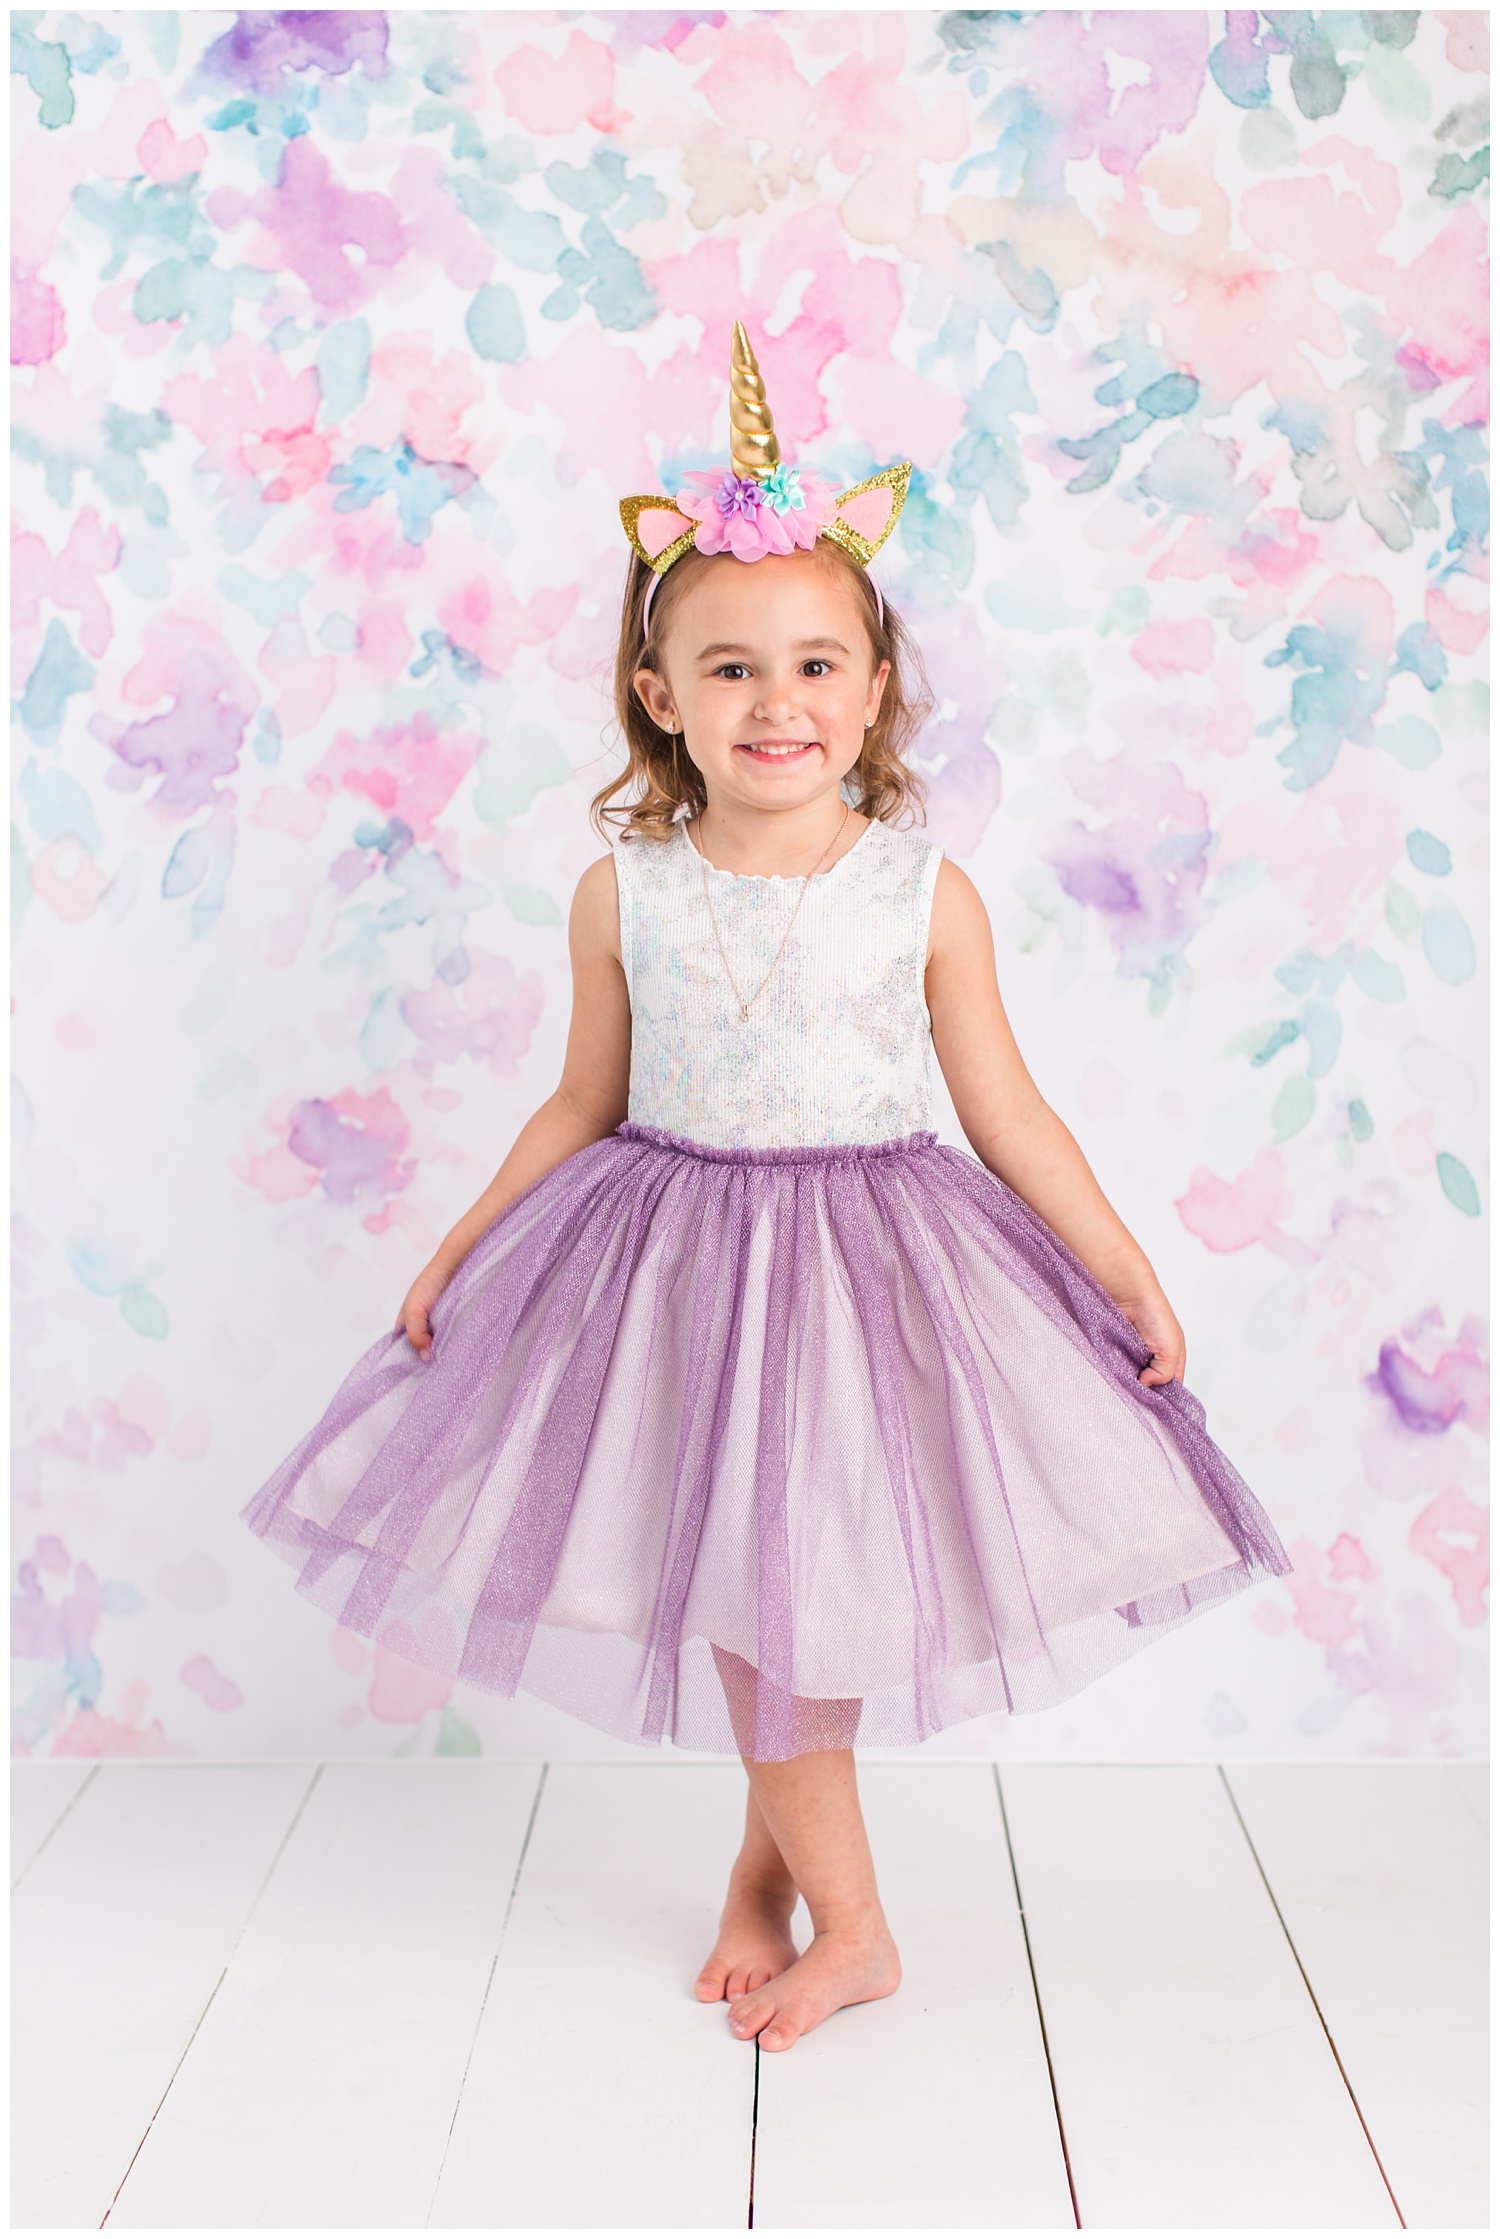 4 year old Sadie curtsey wearing a white and purple sparkling dress and unicorn headband.